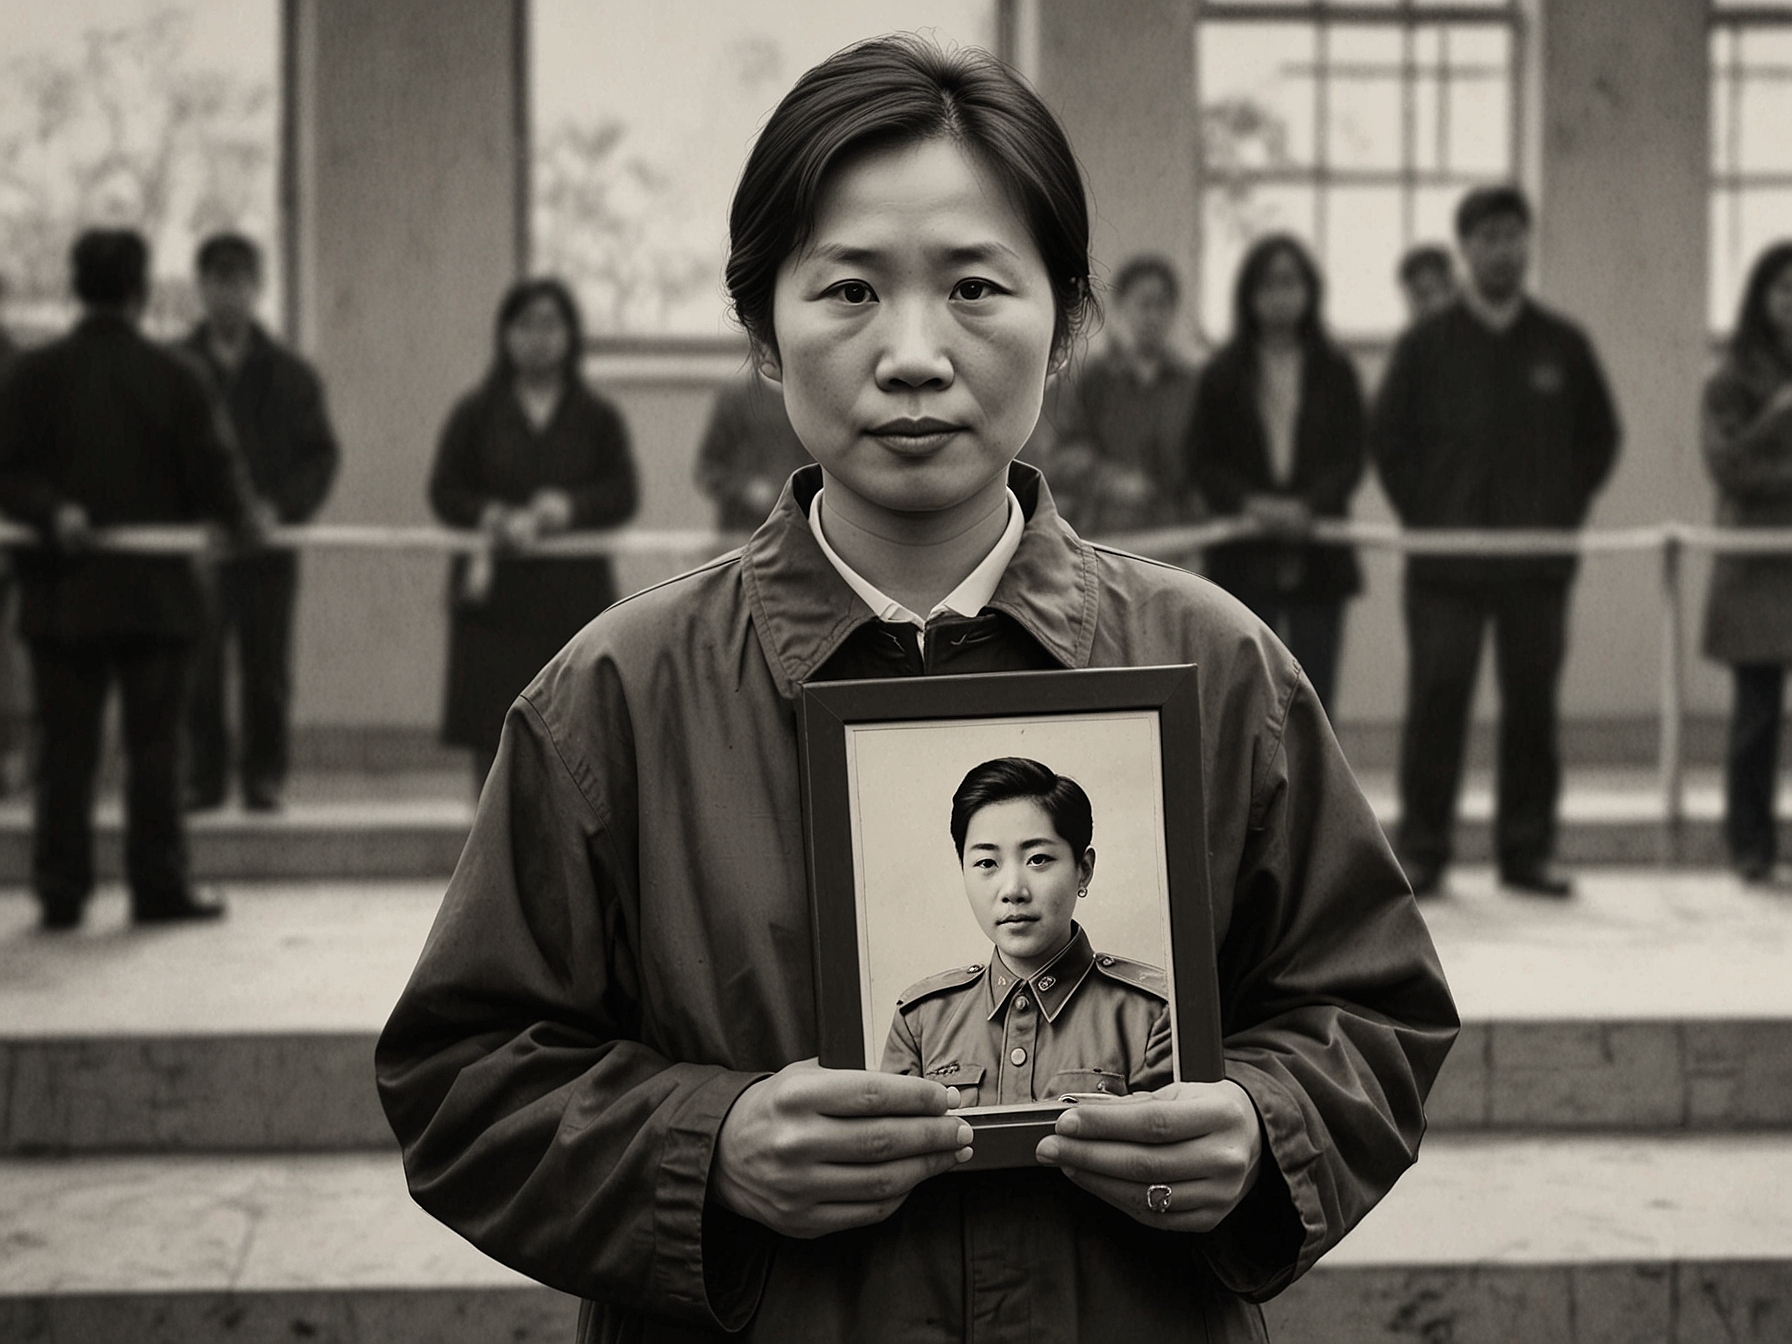 A family member of Hu Youping, holding a photograph of her, speaks emotionally at the ceremony. Awards and tributes are presented to acknowledge her extraordinary bravery and selflessness.